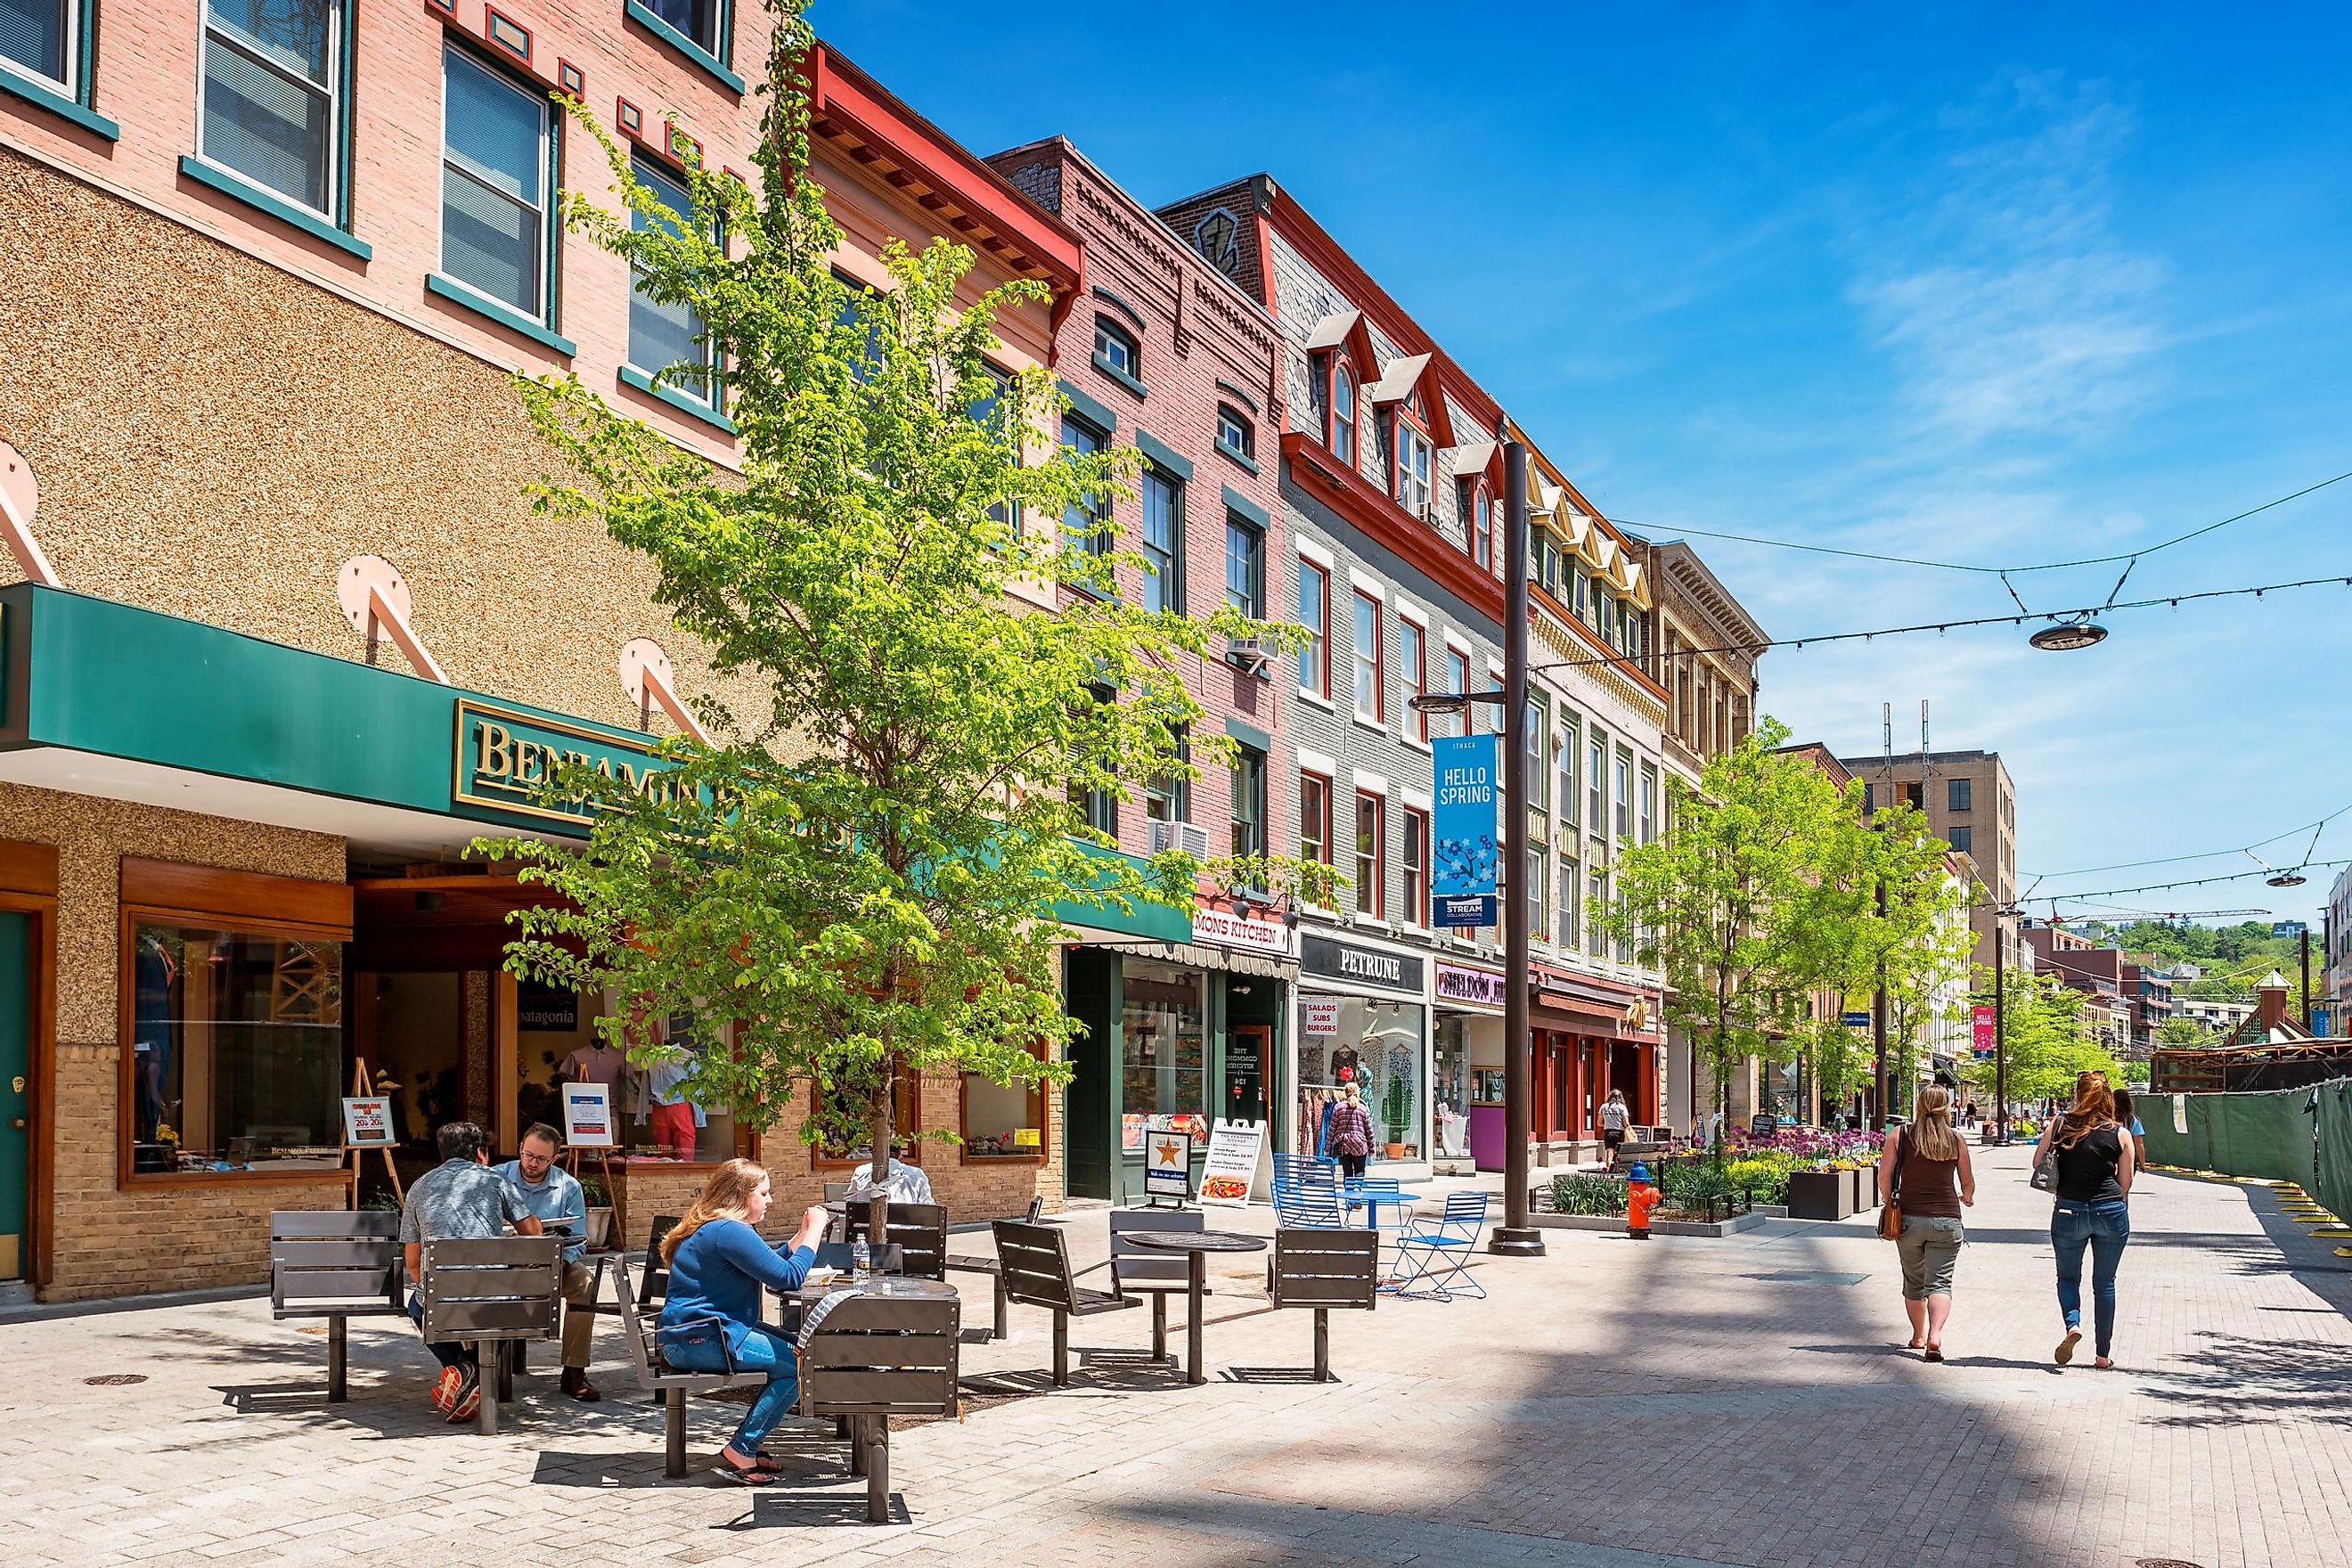 People have lunch and walk in a pedestrian area of downtown Ithaca, New York State